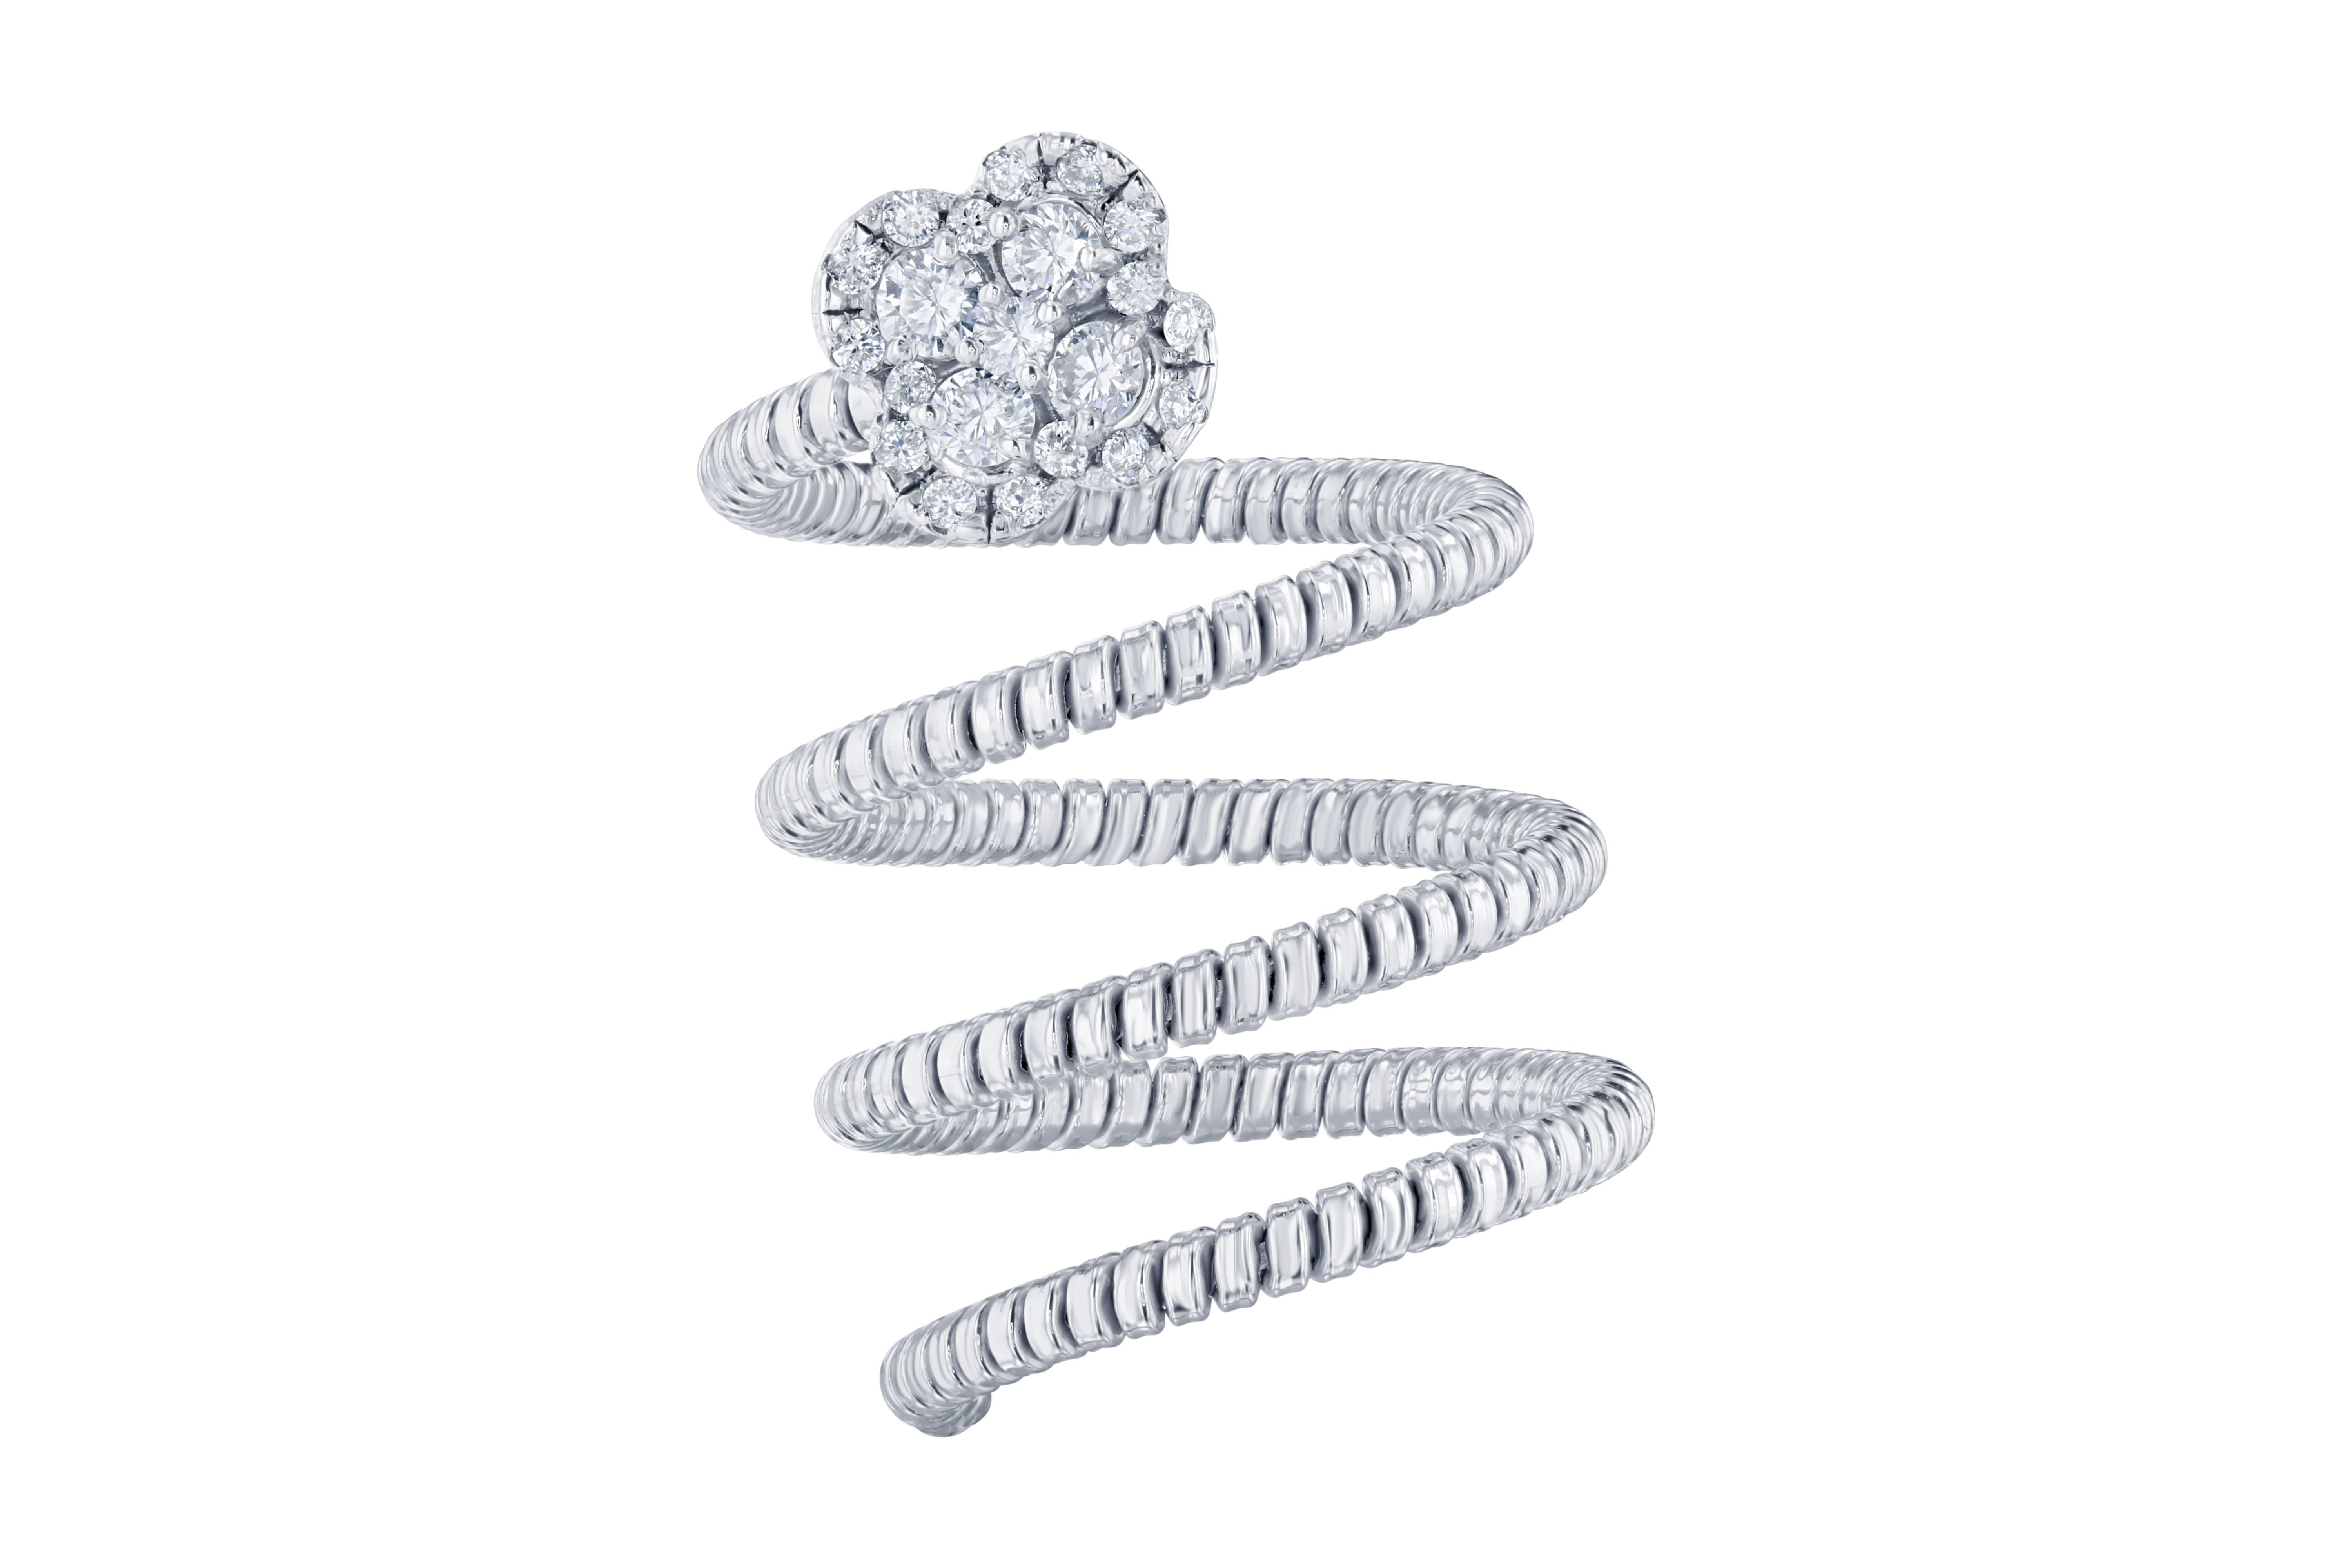 A very unique and glamorous setting!  This is a one size fits all wrap around cocktail ring that has 21 Round Cut Diamonds that weigh 0.57 carat.  The ring is made in 14K White Gold and weighs approximately 5.3 grams.  The length of this ring from